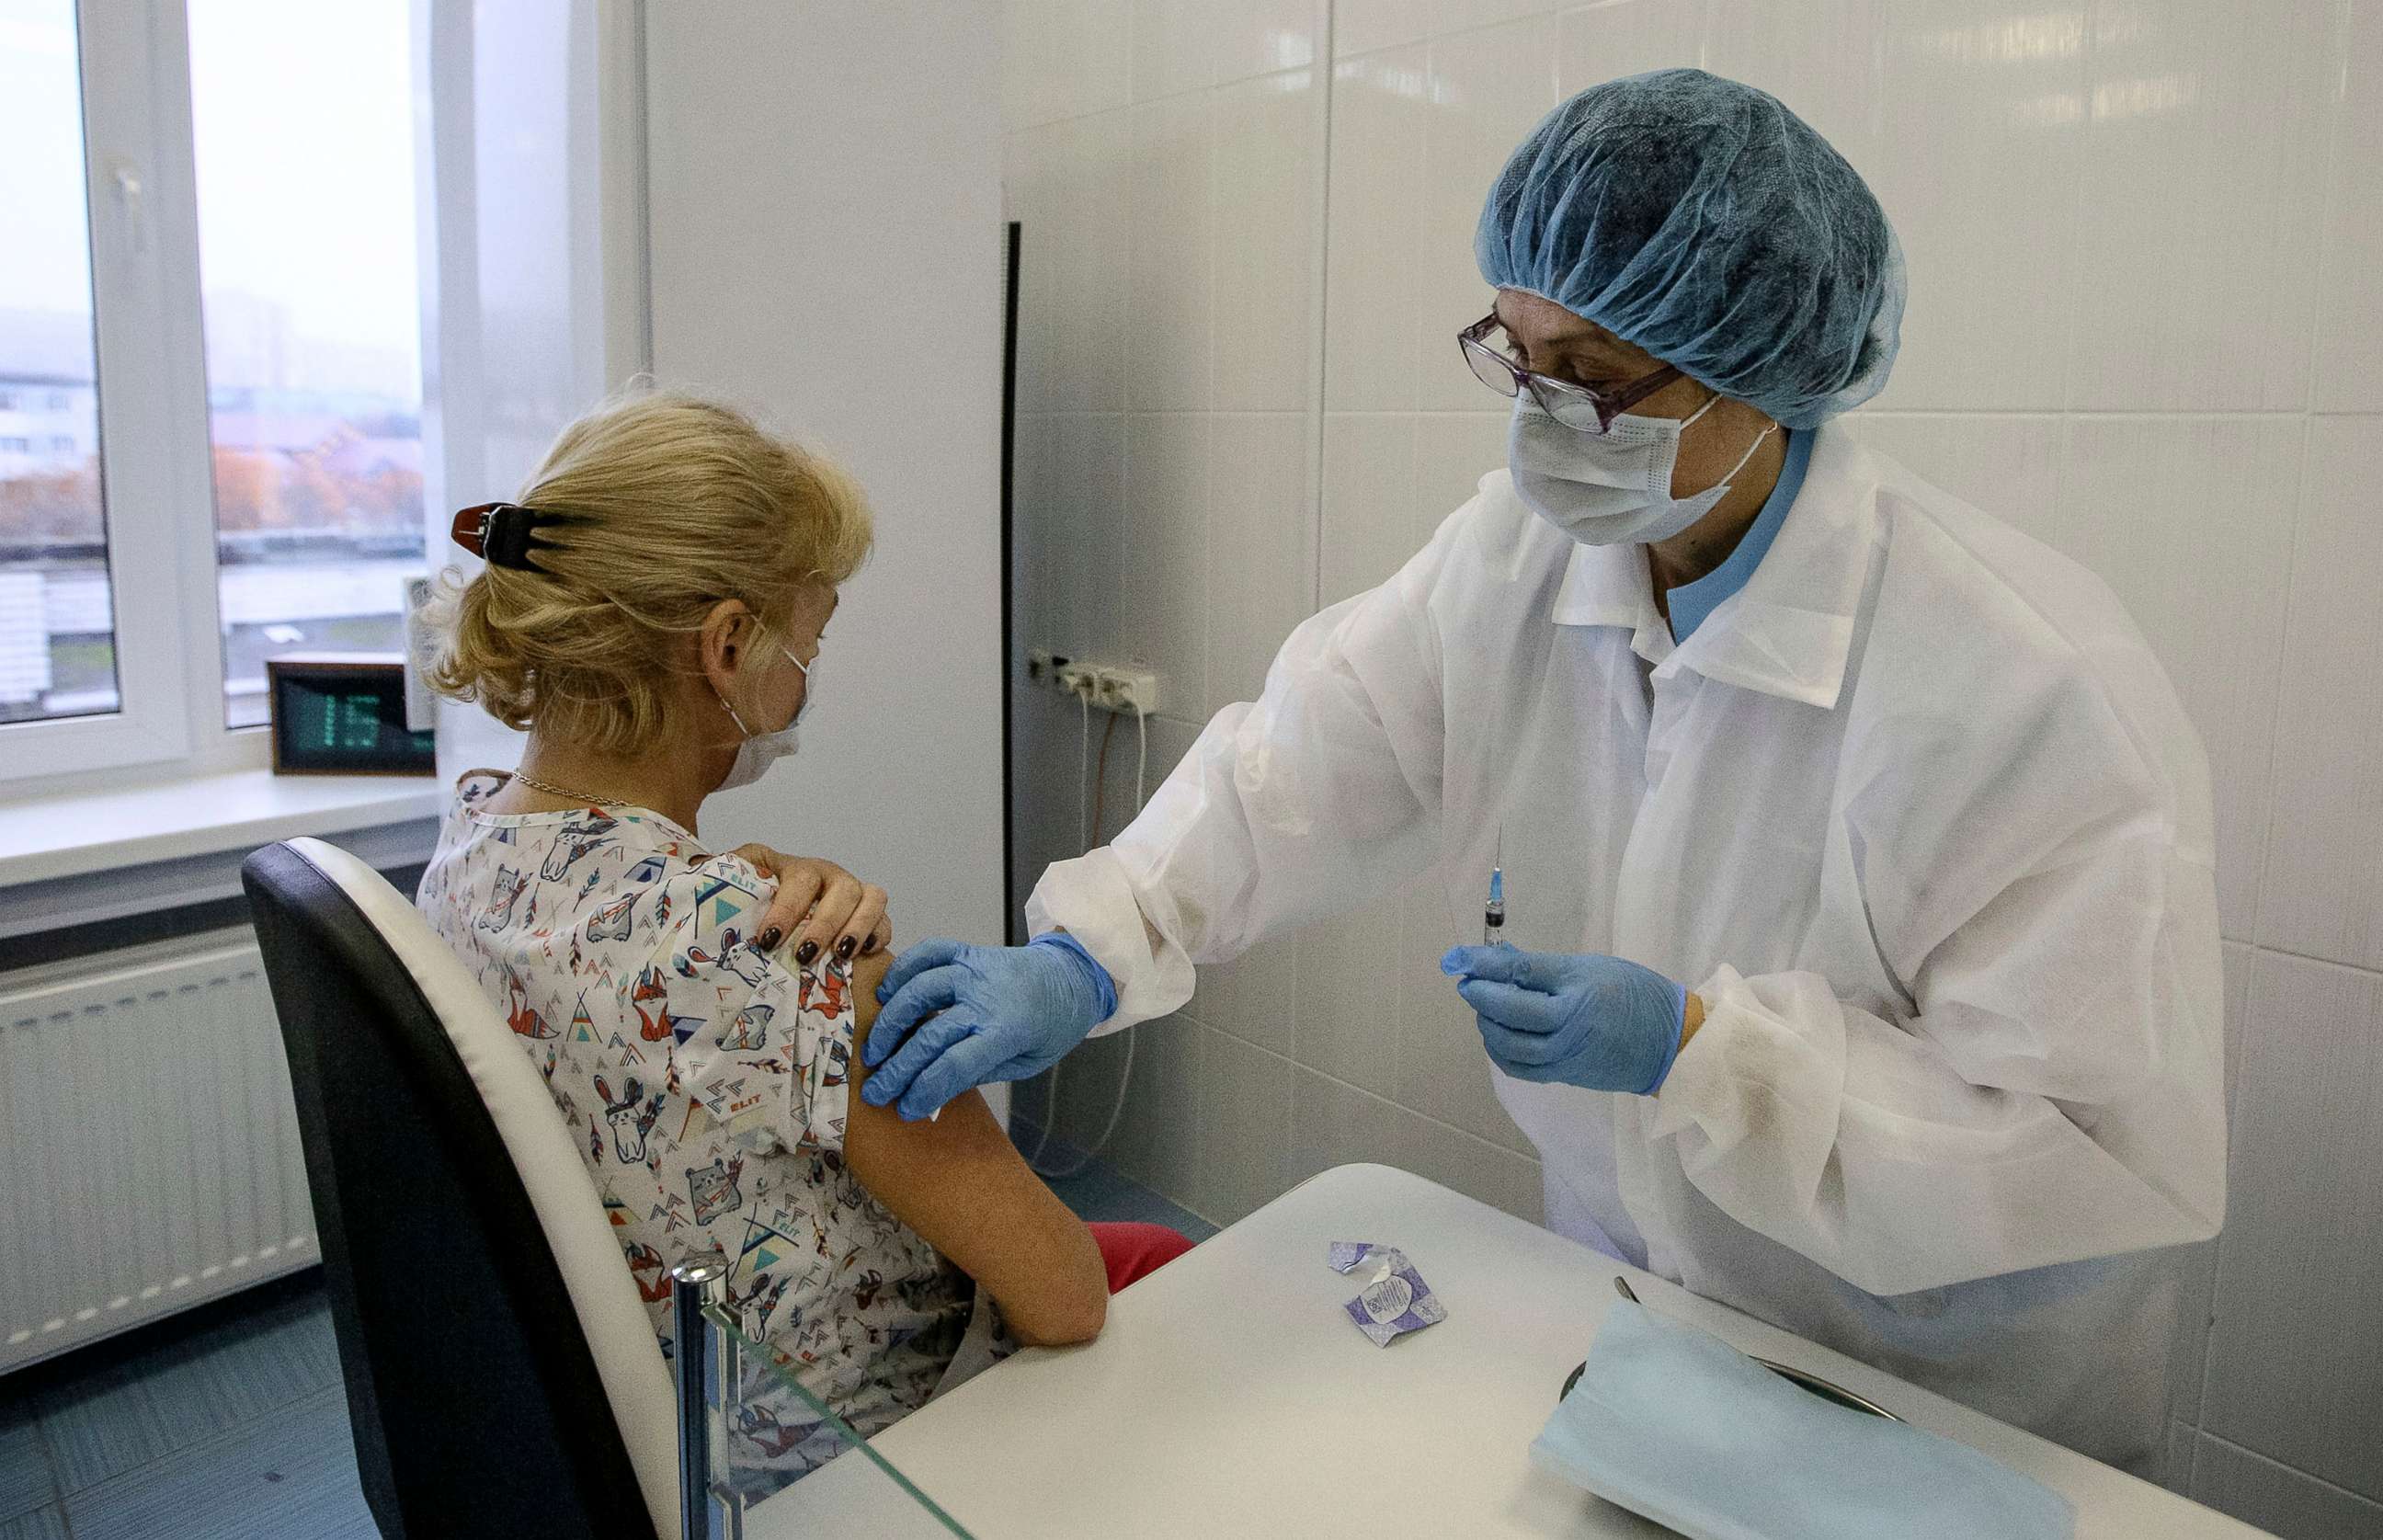 PHOTO:  An employee of the Murmansk Regional Clinical Hospital is inoculated with Russia's coronavirus vaccine in Murmansk, Russia, May 10, 2020.